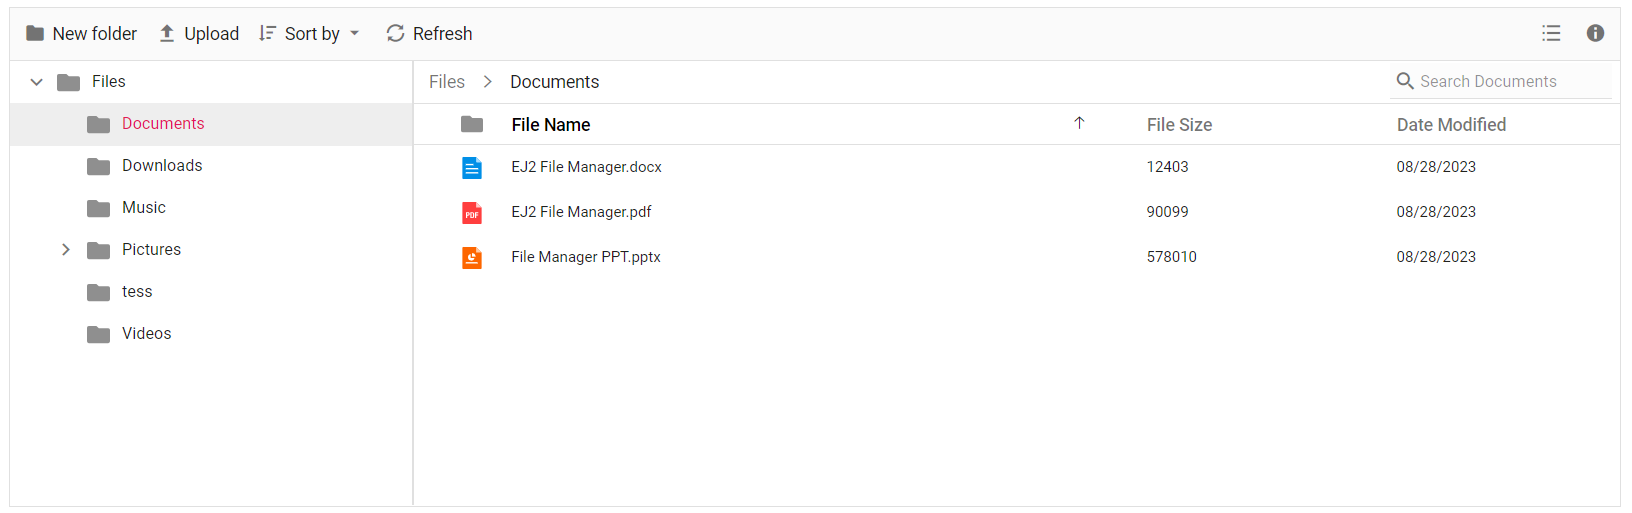 FileManager details-view 